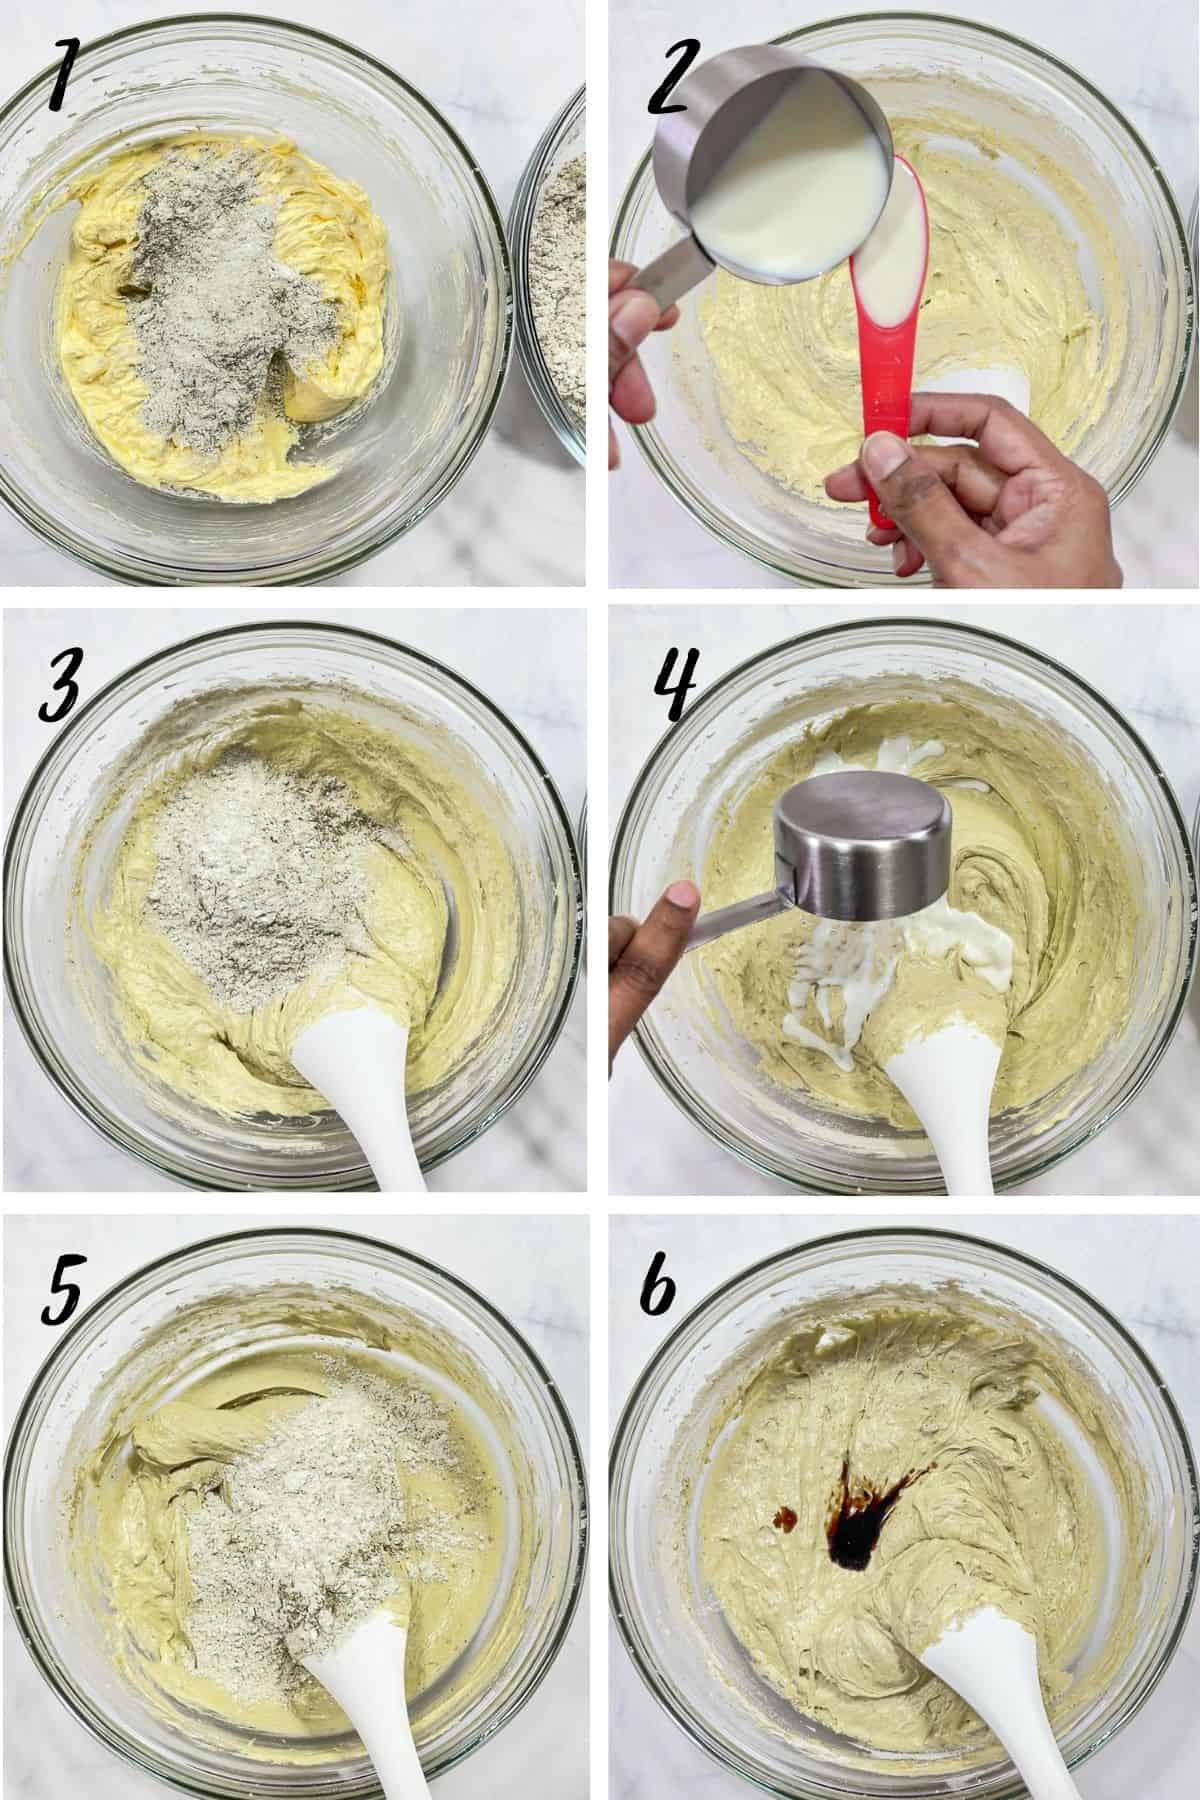 A poster of 6 images showing how to fold flour and milk into cake batter.